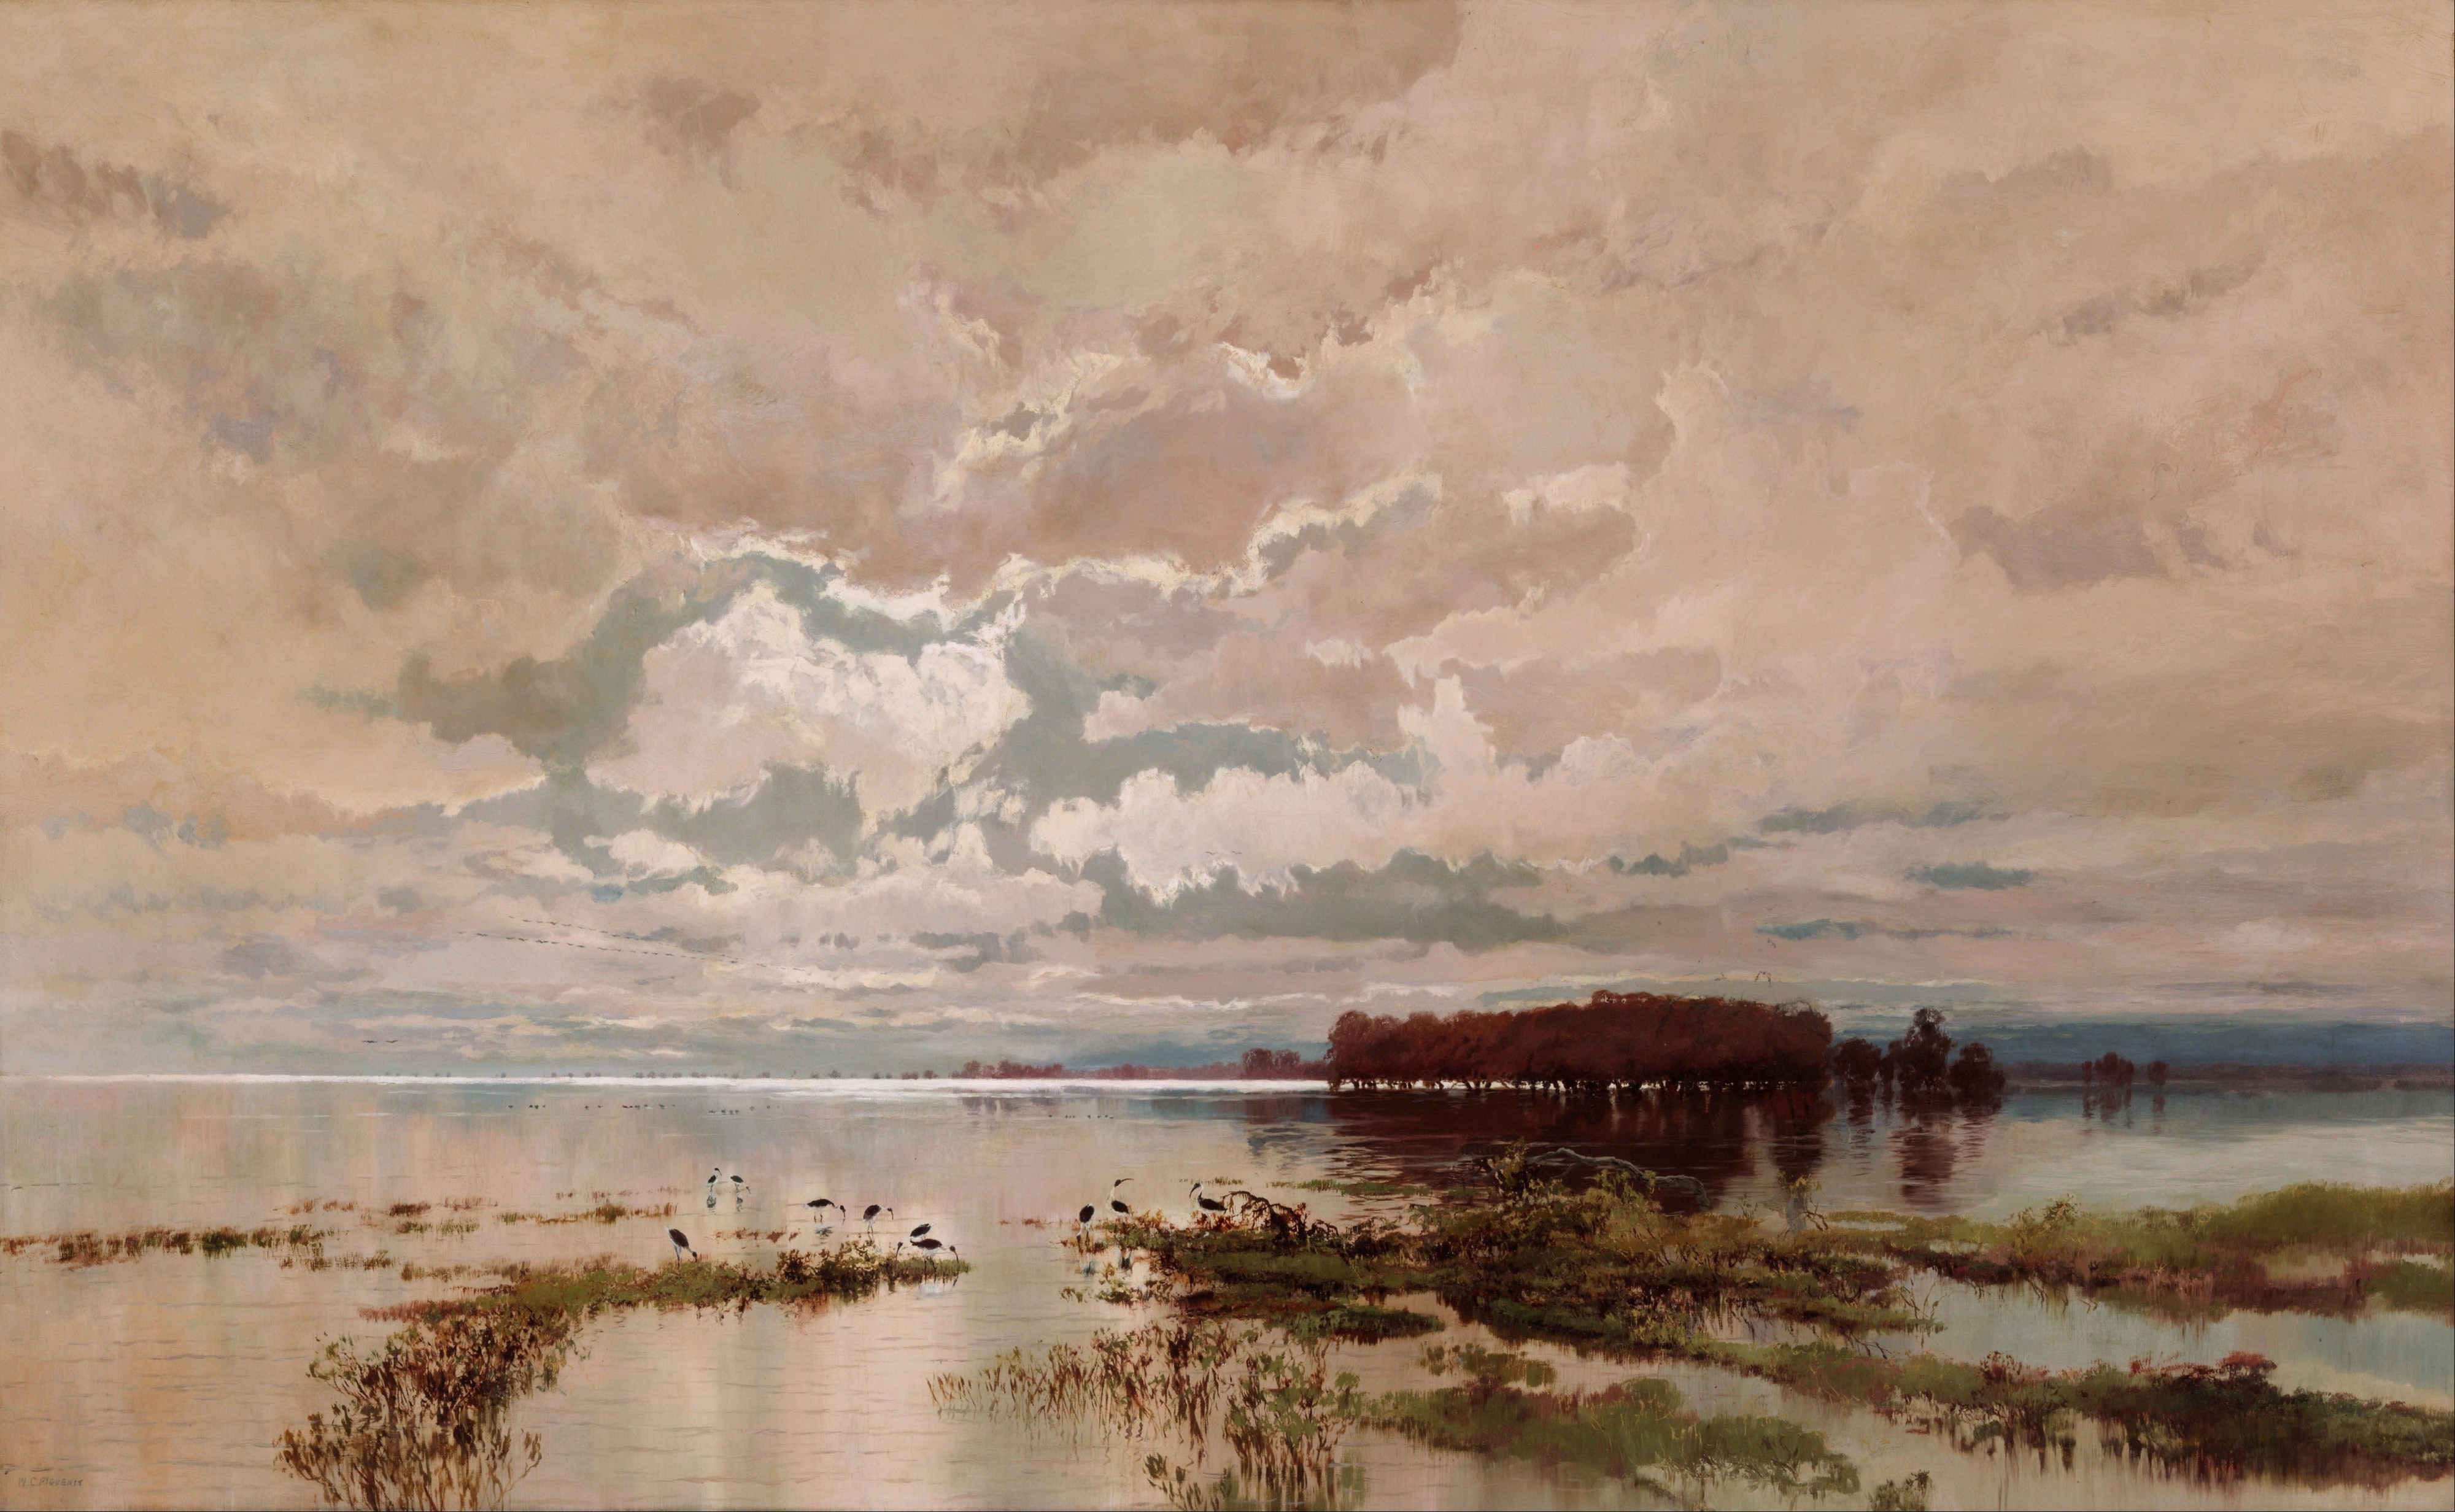 Wc Piguenit - The flood in the Darling 1890 - Google Art Project